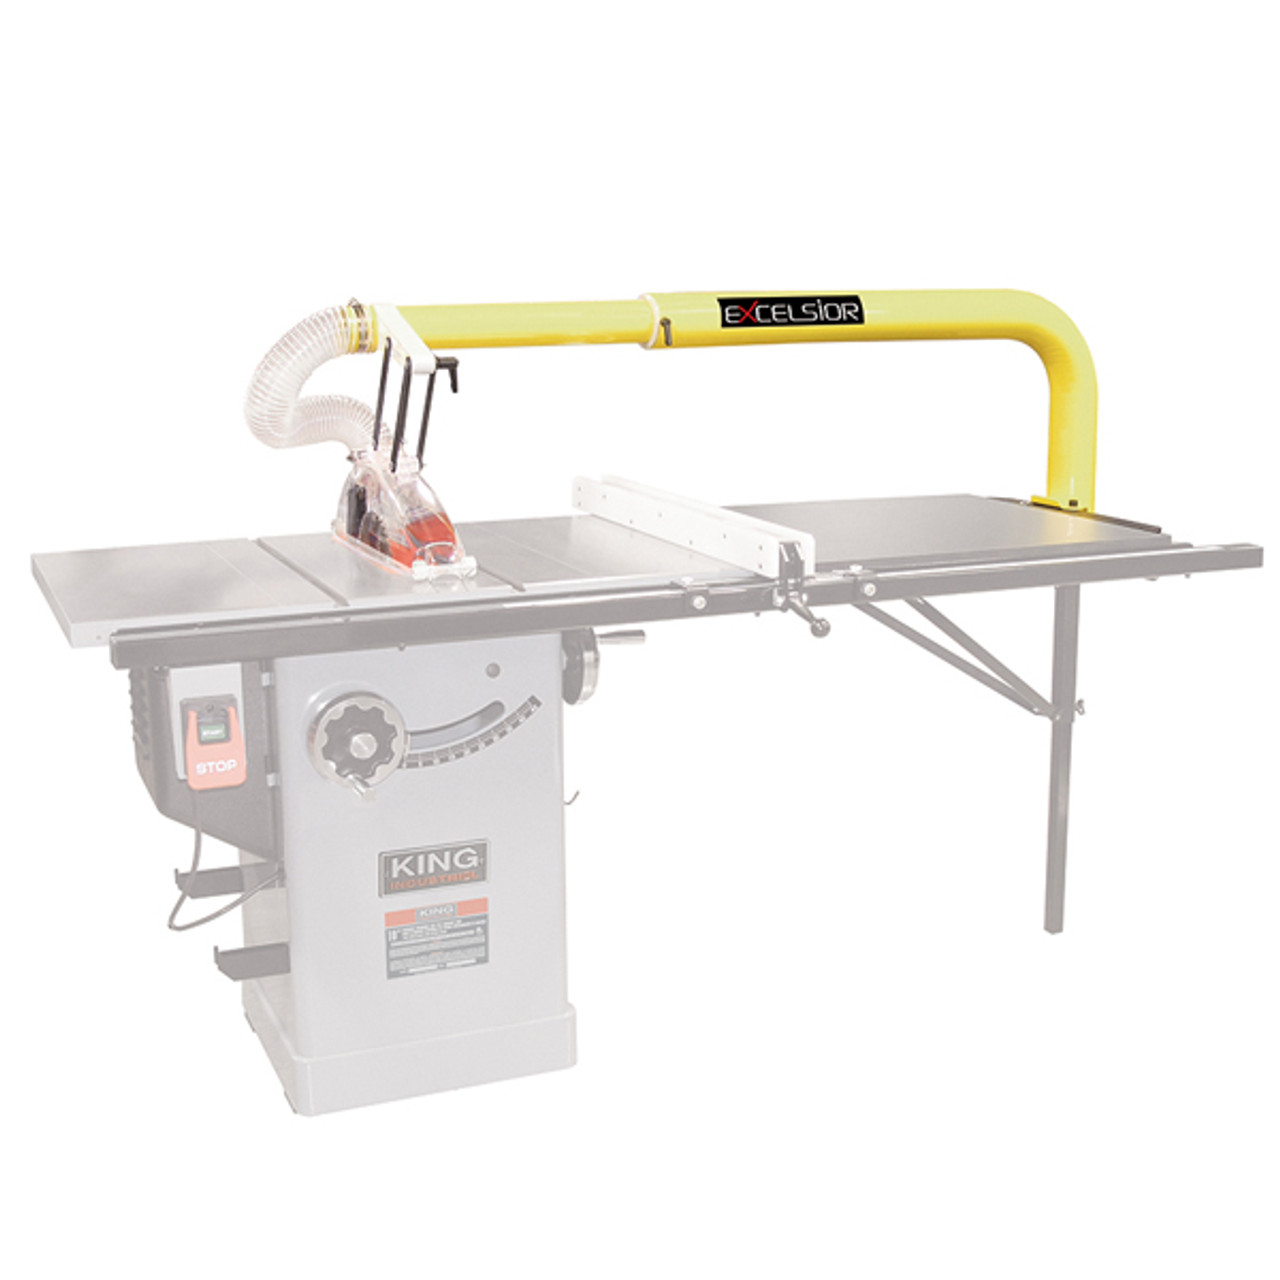 King Industrial KING-XL-1014 Overarm Blade Cover System with Dust Collection  Atlas-Machinery